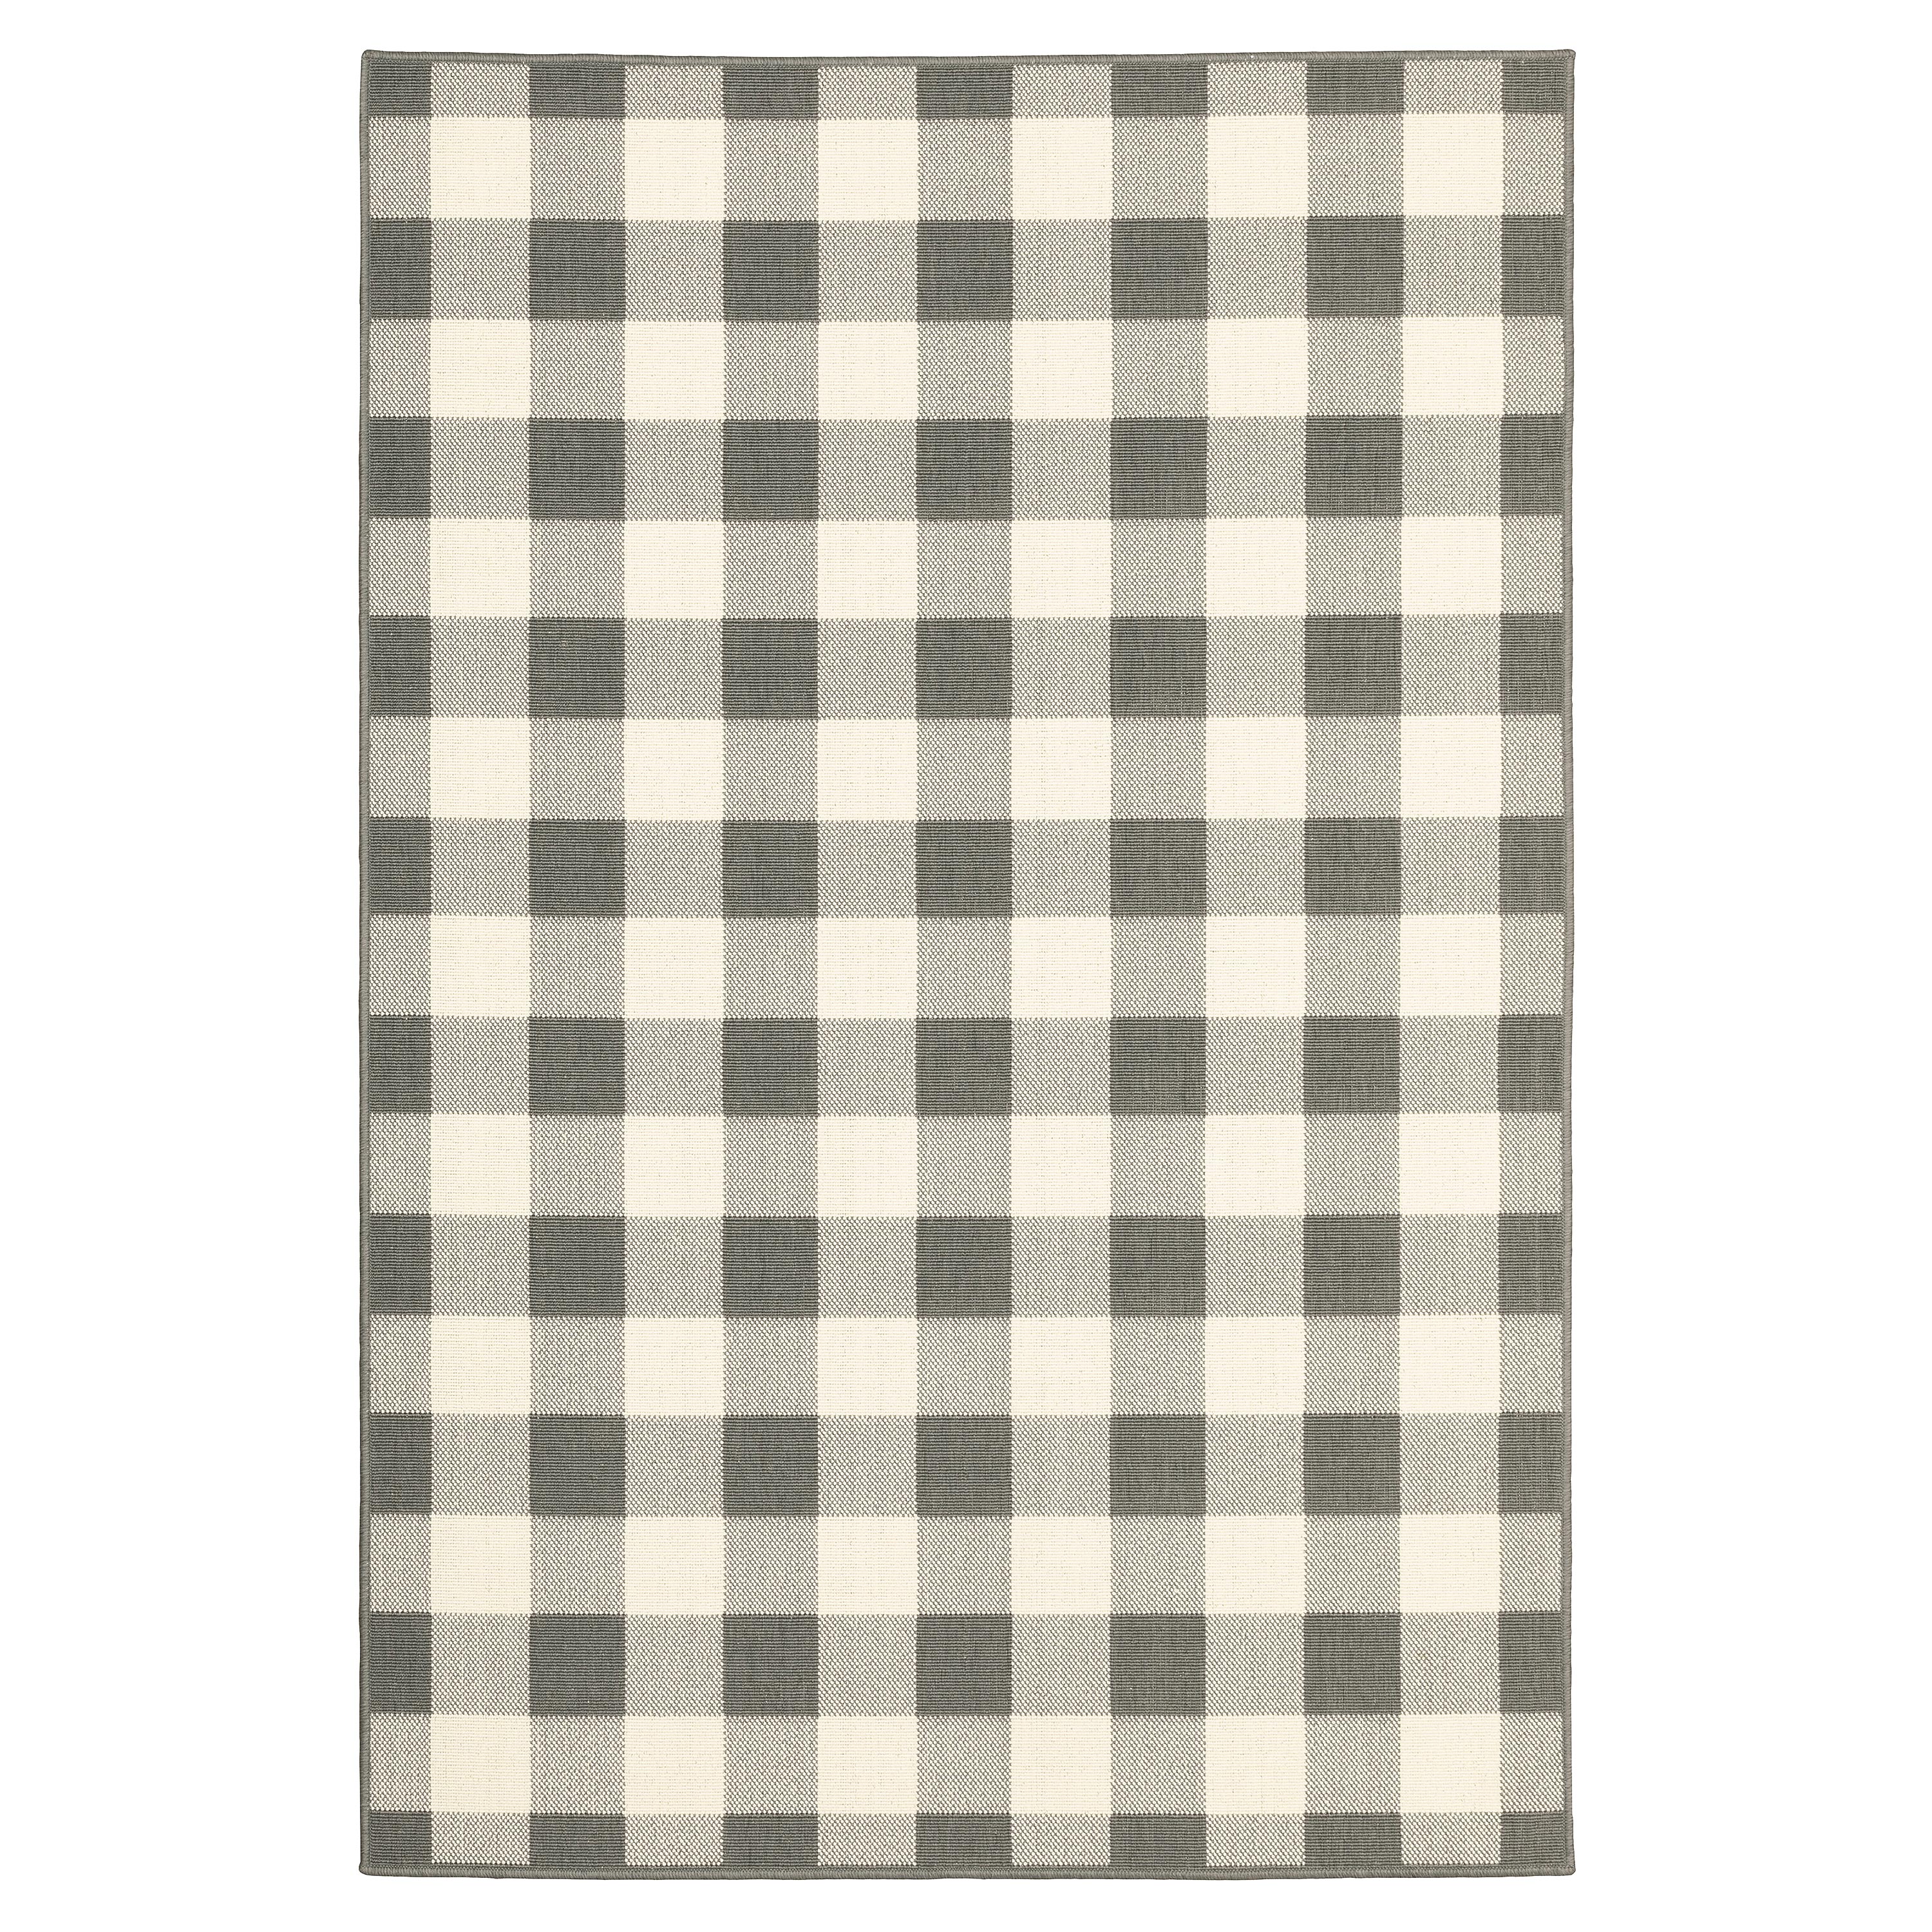 Gracie Oaks Buffalo Plaid Outdoor Rug Grey 27.5 X 43 Inches Cotton  Hand-Woven Checkered Front Door Mat in Gra…